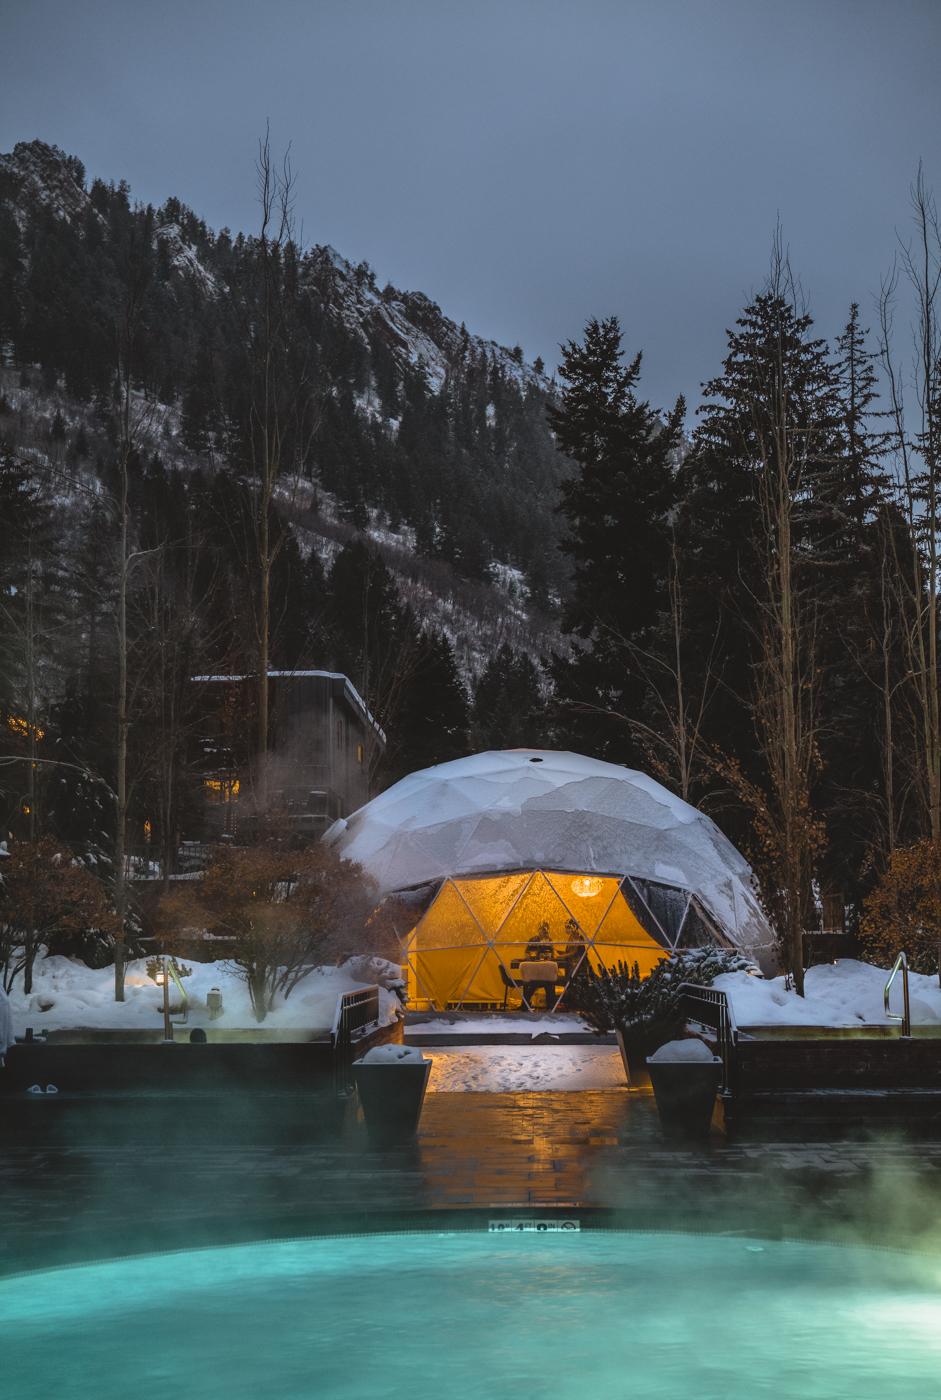 a white geodesic dome in winter, In the foreground, the illuminated swimming pool